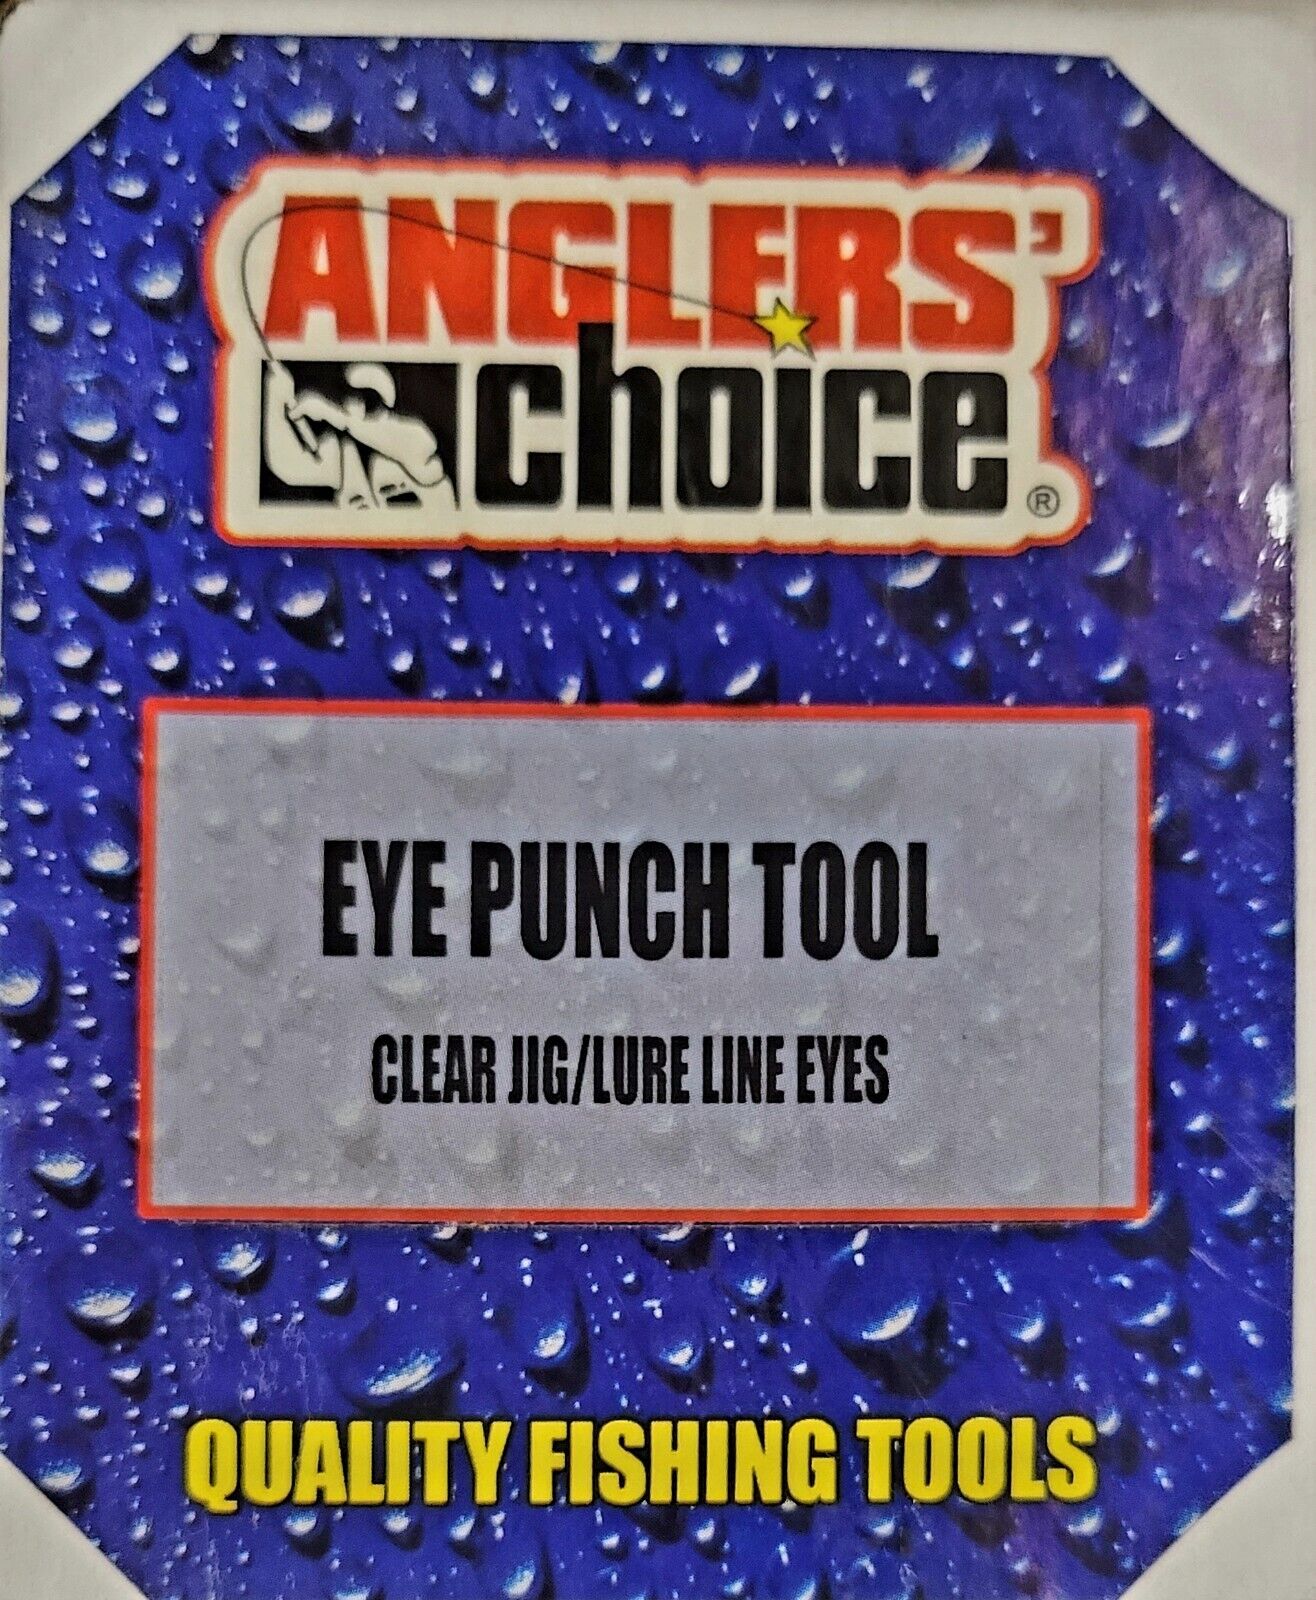 ANGLERS' CHOICE Eye Punch Tool QUALITY FISHING TOOLS – POINDEXTER OUTDOORS